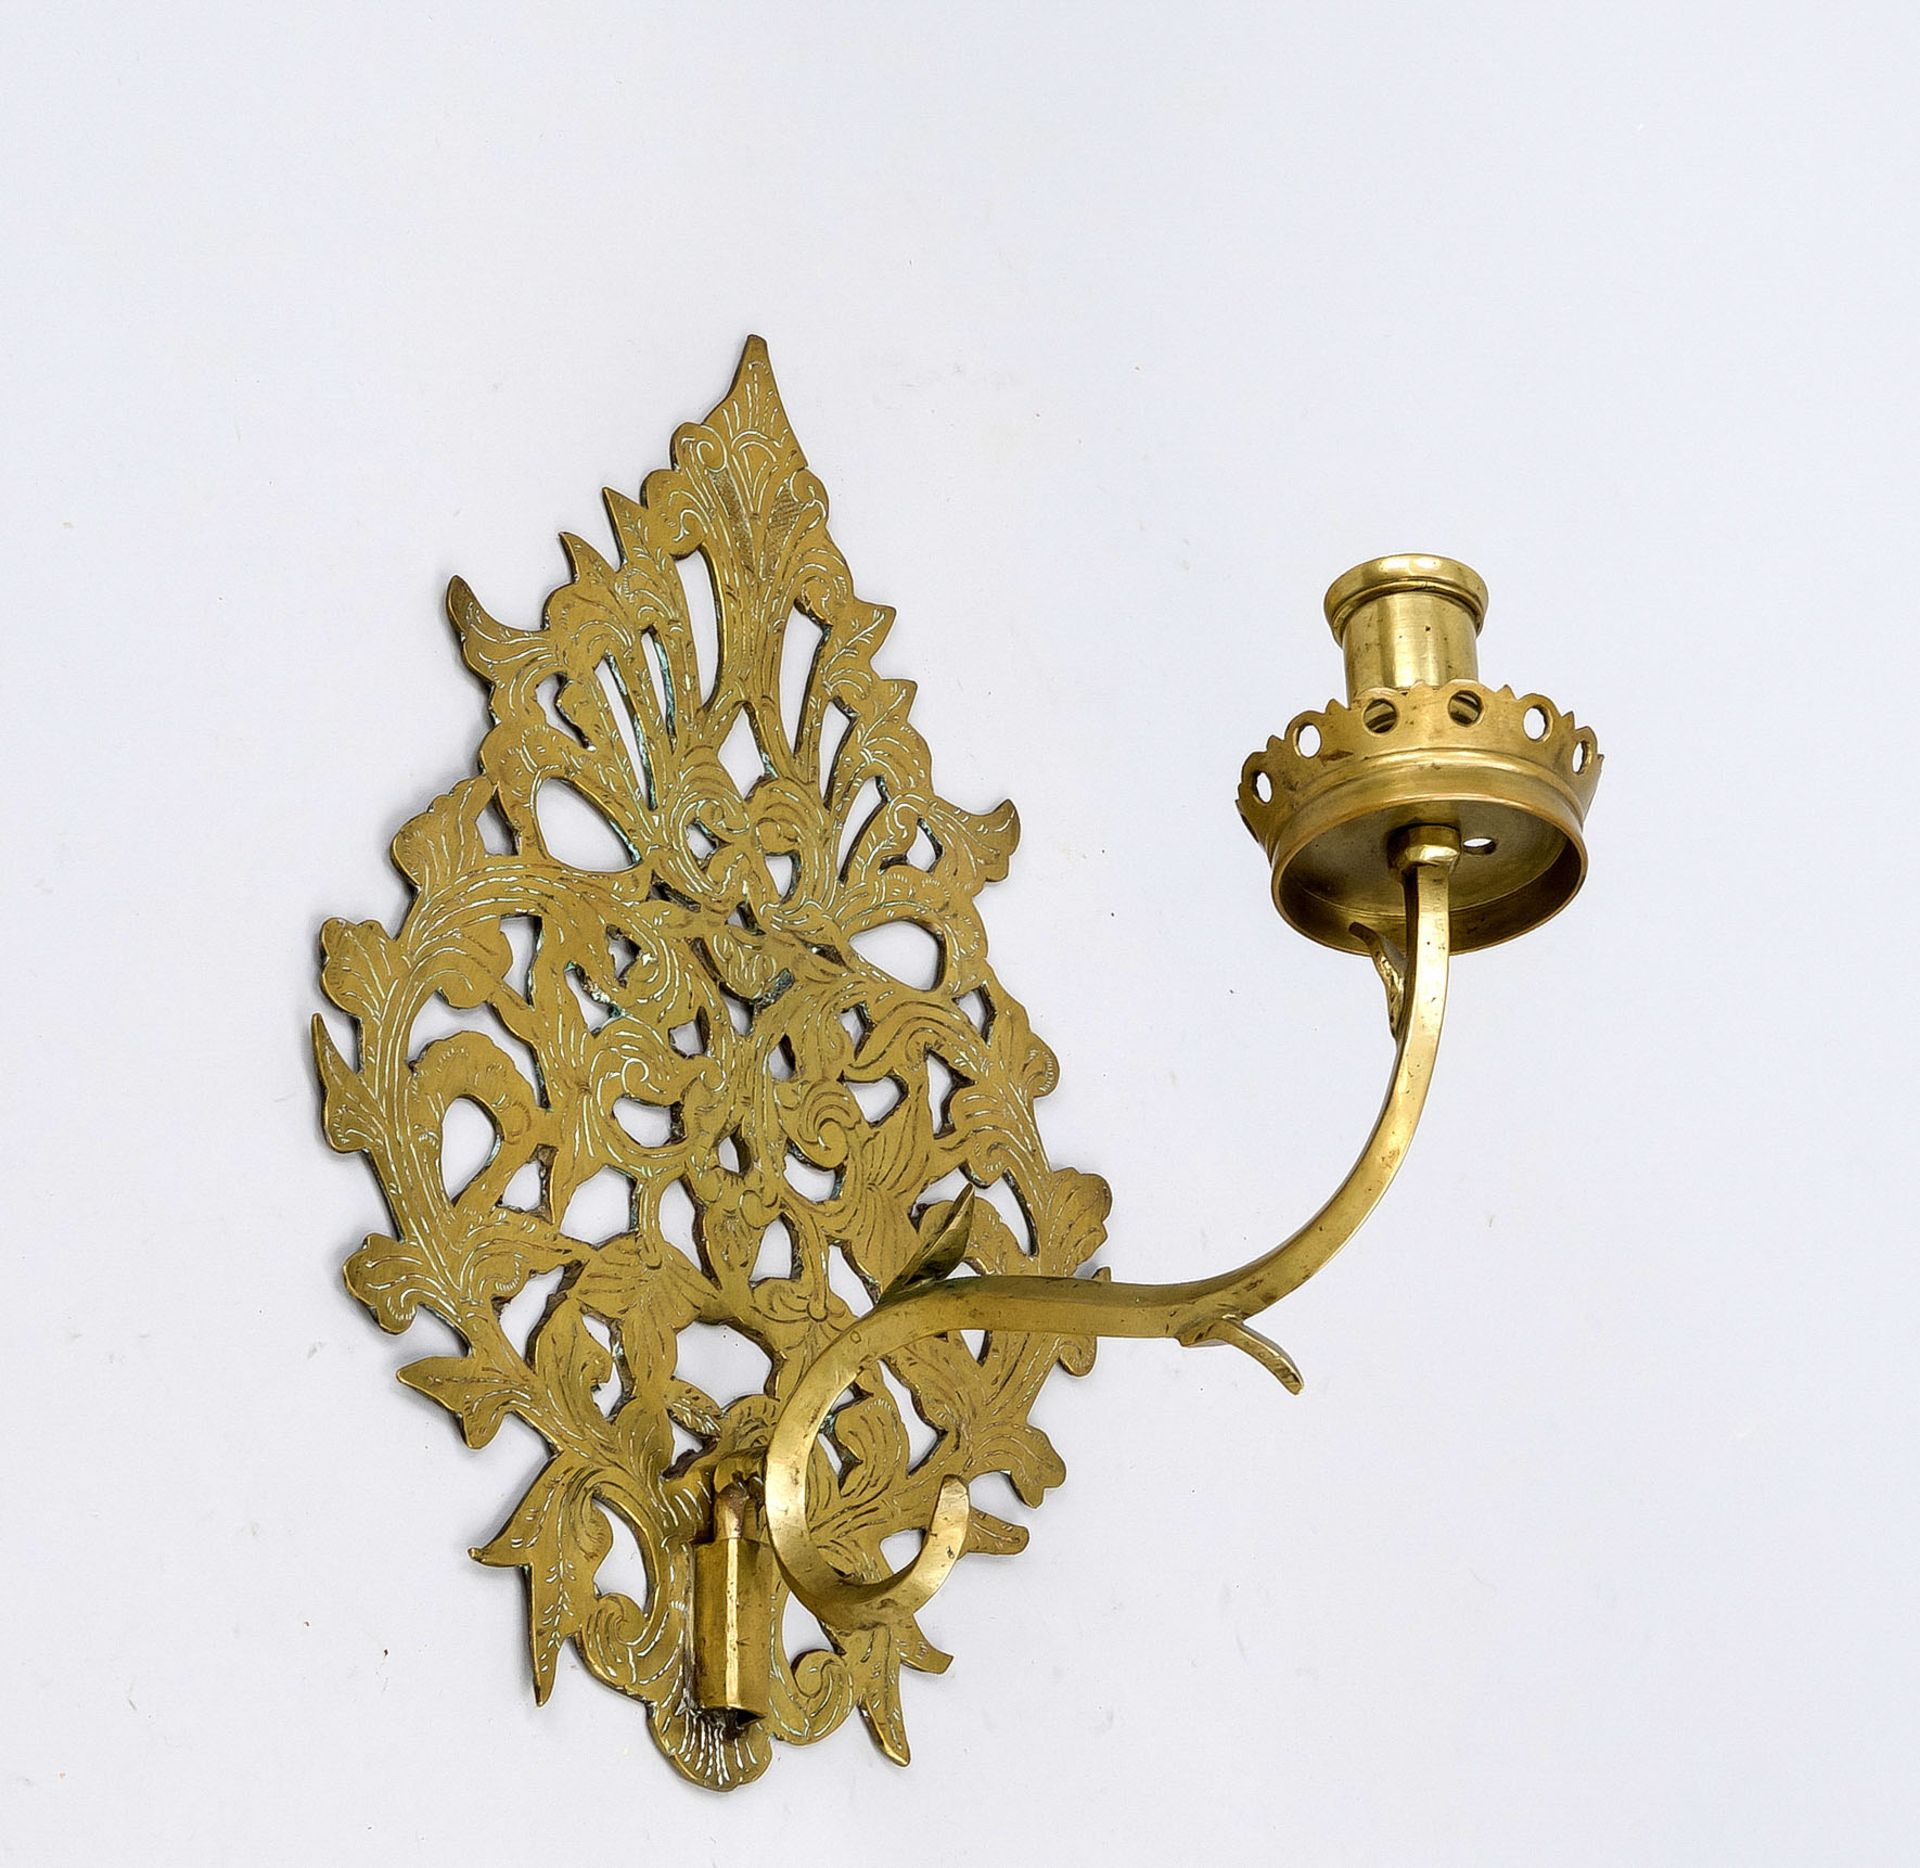 Wall candlestick, 18th/19th century, brass, openwork wall plate with engraved foliage, curved